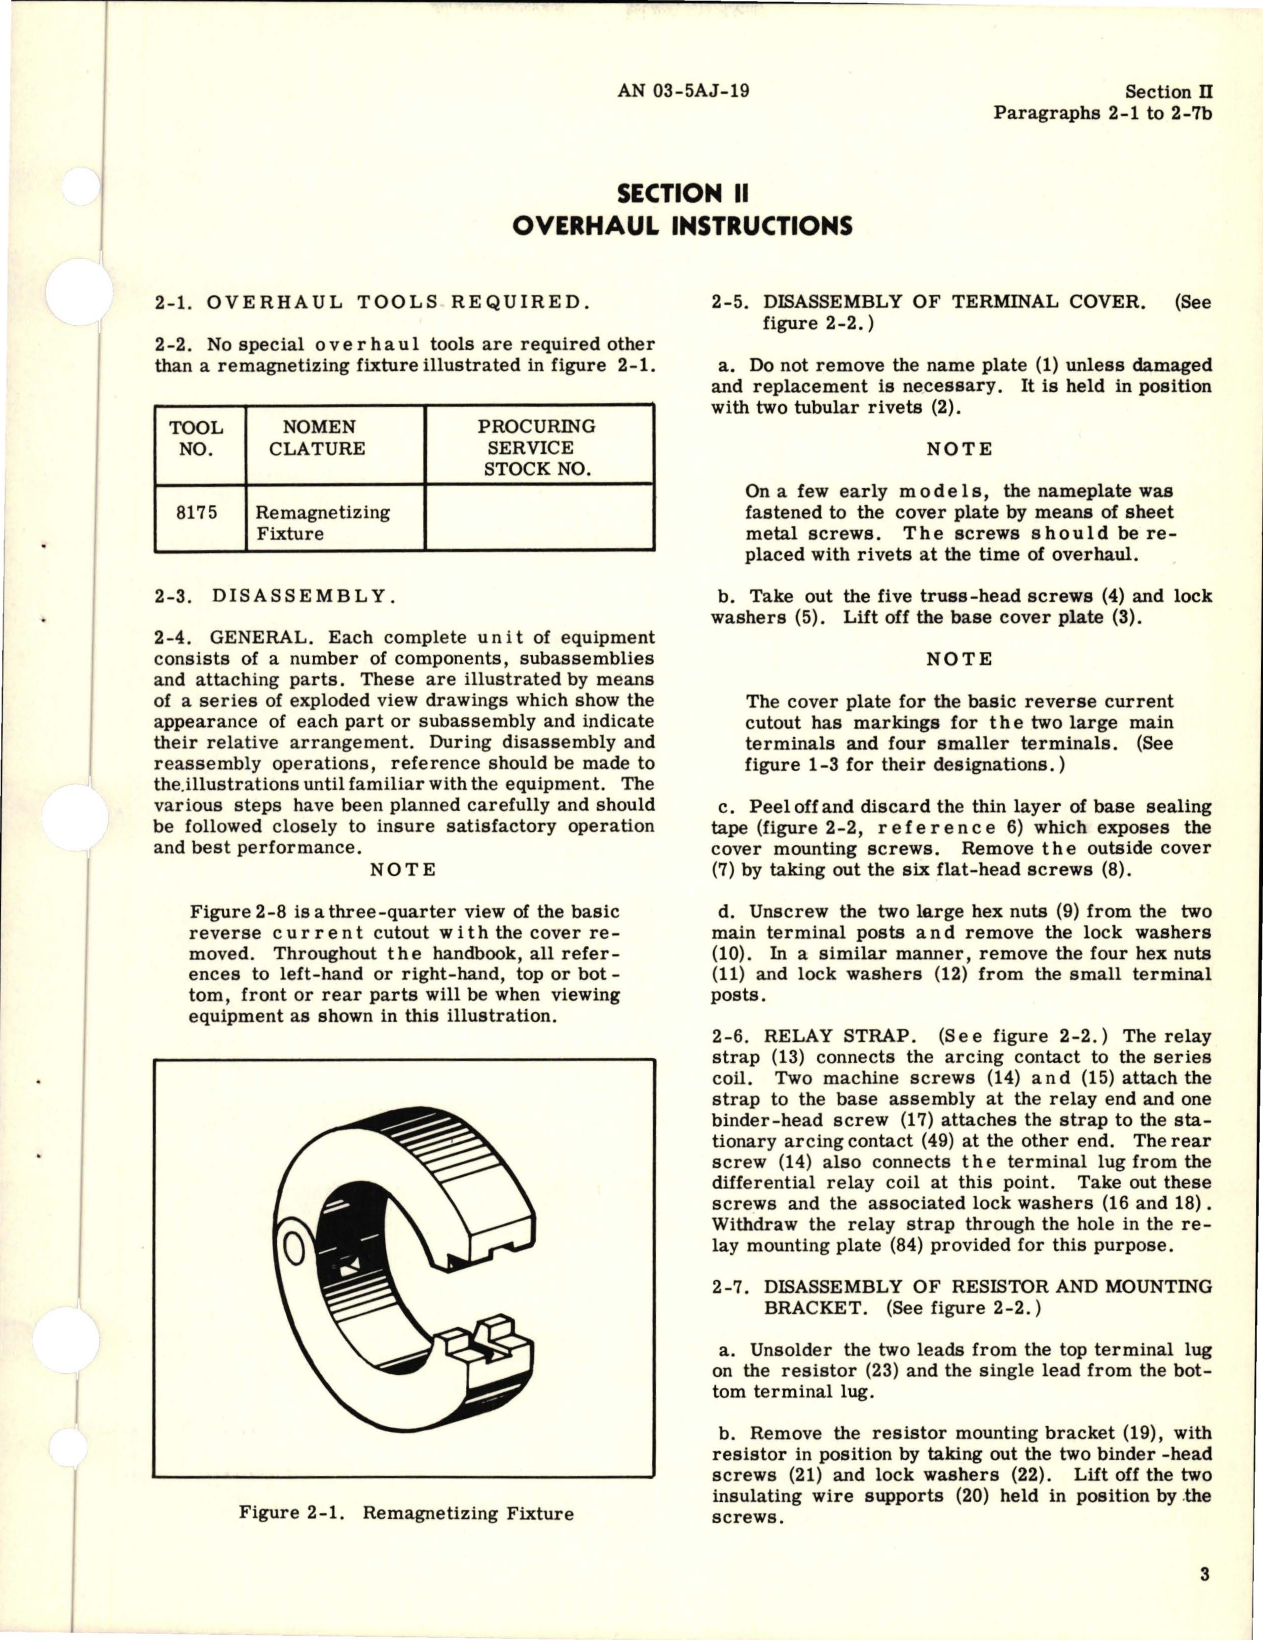 Sample page 7 from AirCorps Library document: Overhaul Instructions for Reverse Current Cutout - Model A-750D, and Contactors - A-751D and A-751E 